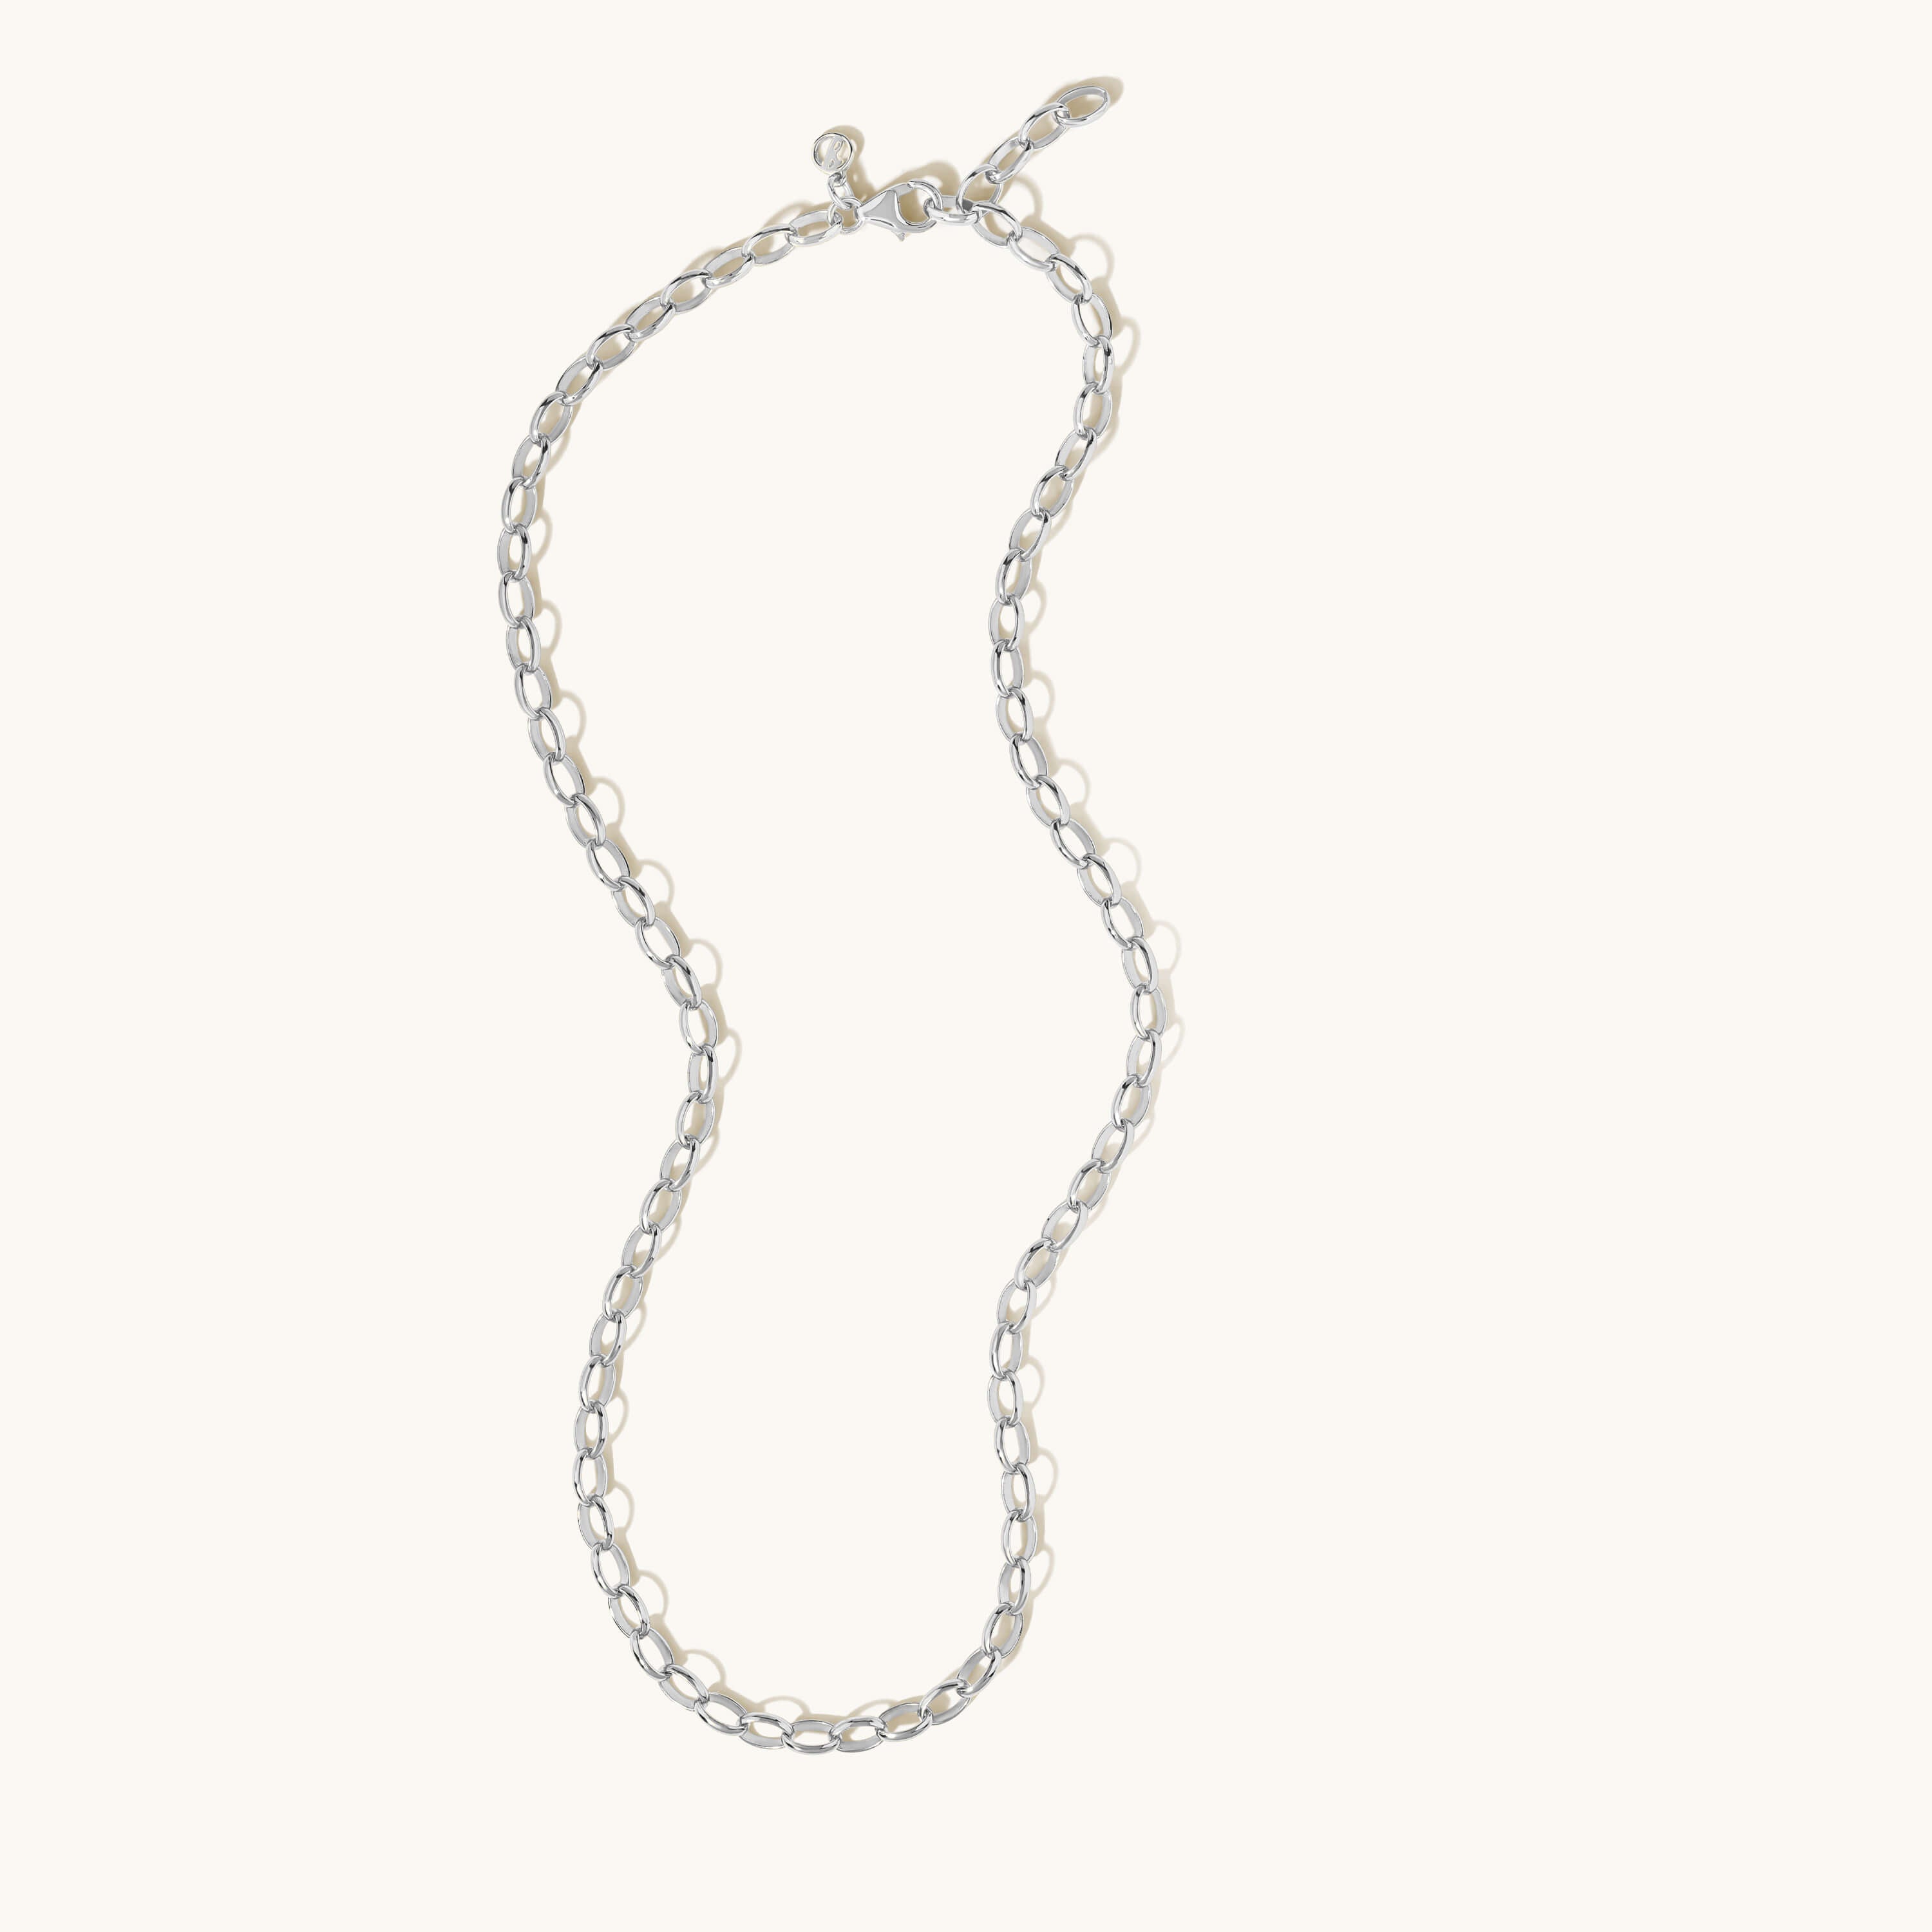 Oval Link Charm Necklace